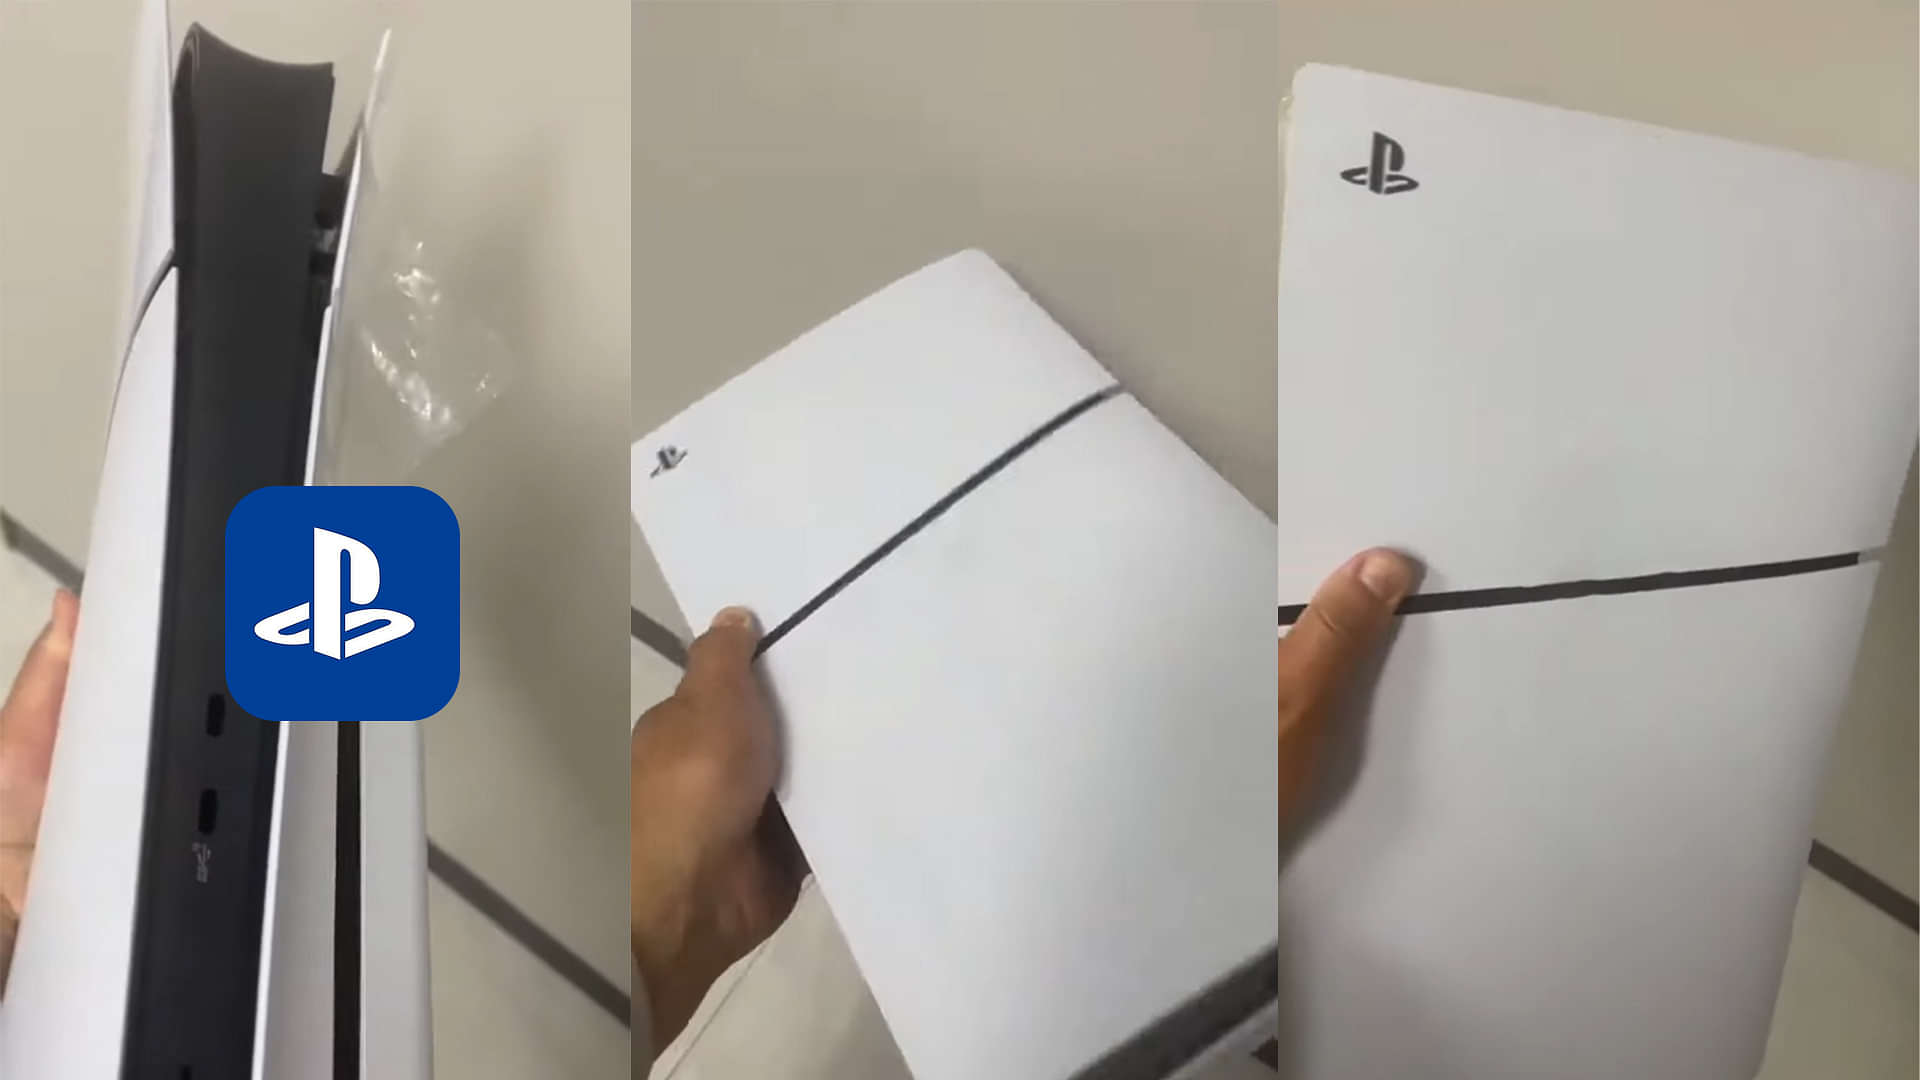 PS5 Pro and Slim: Everything known about Project Trinity so far